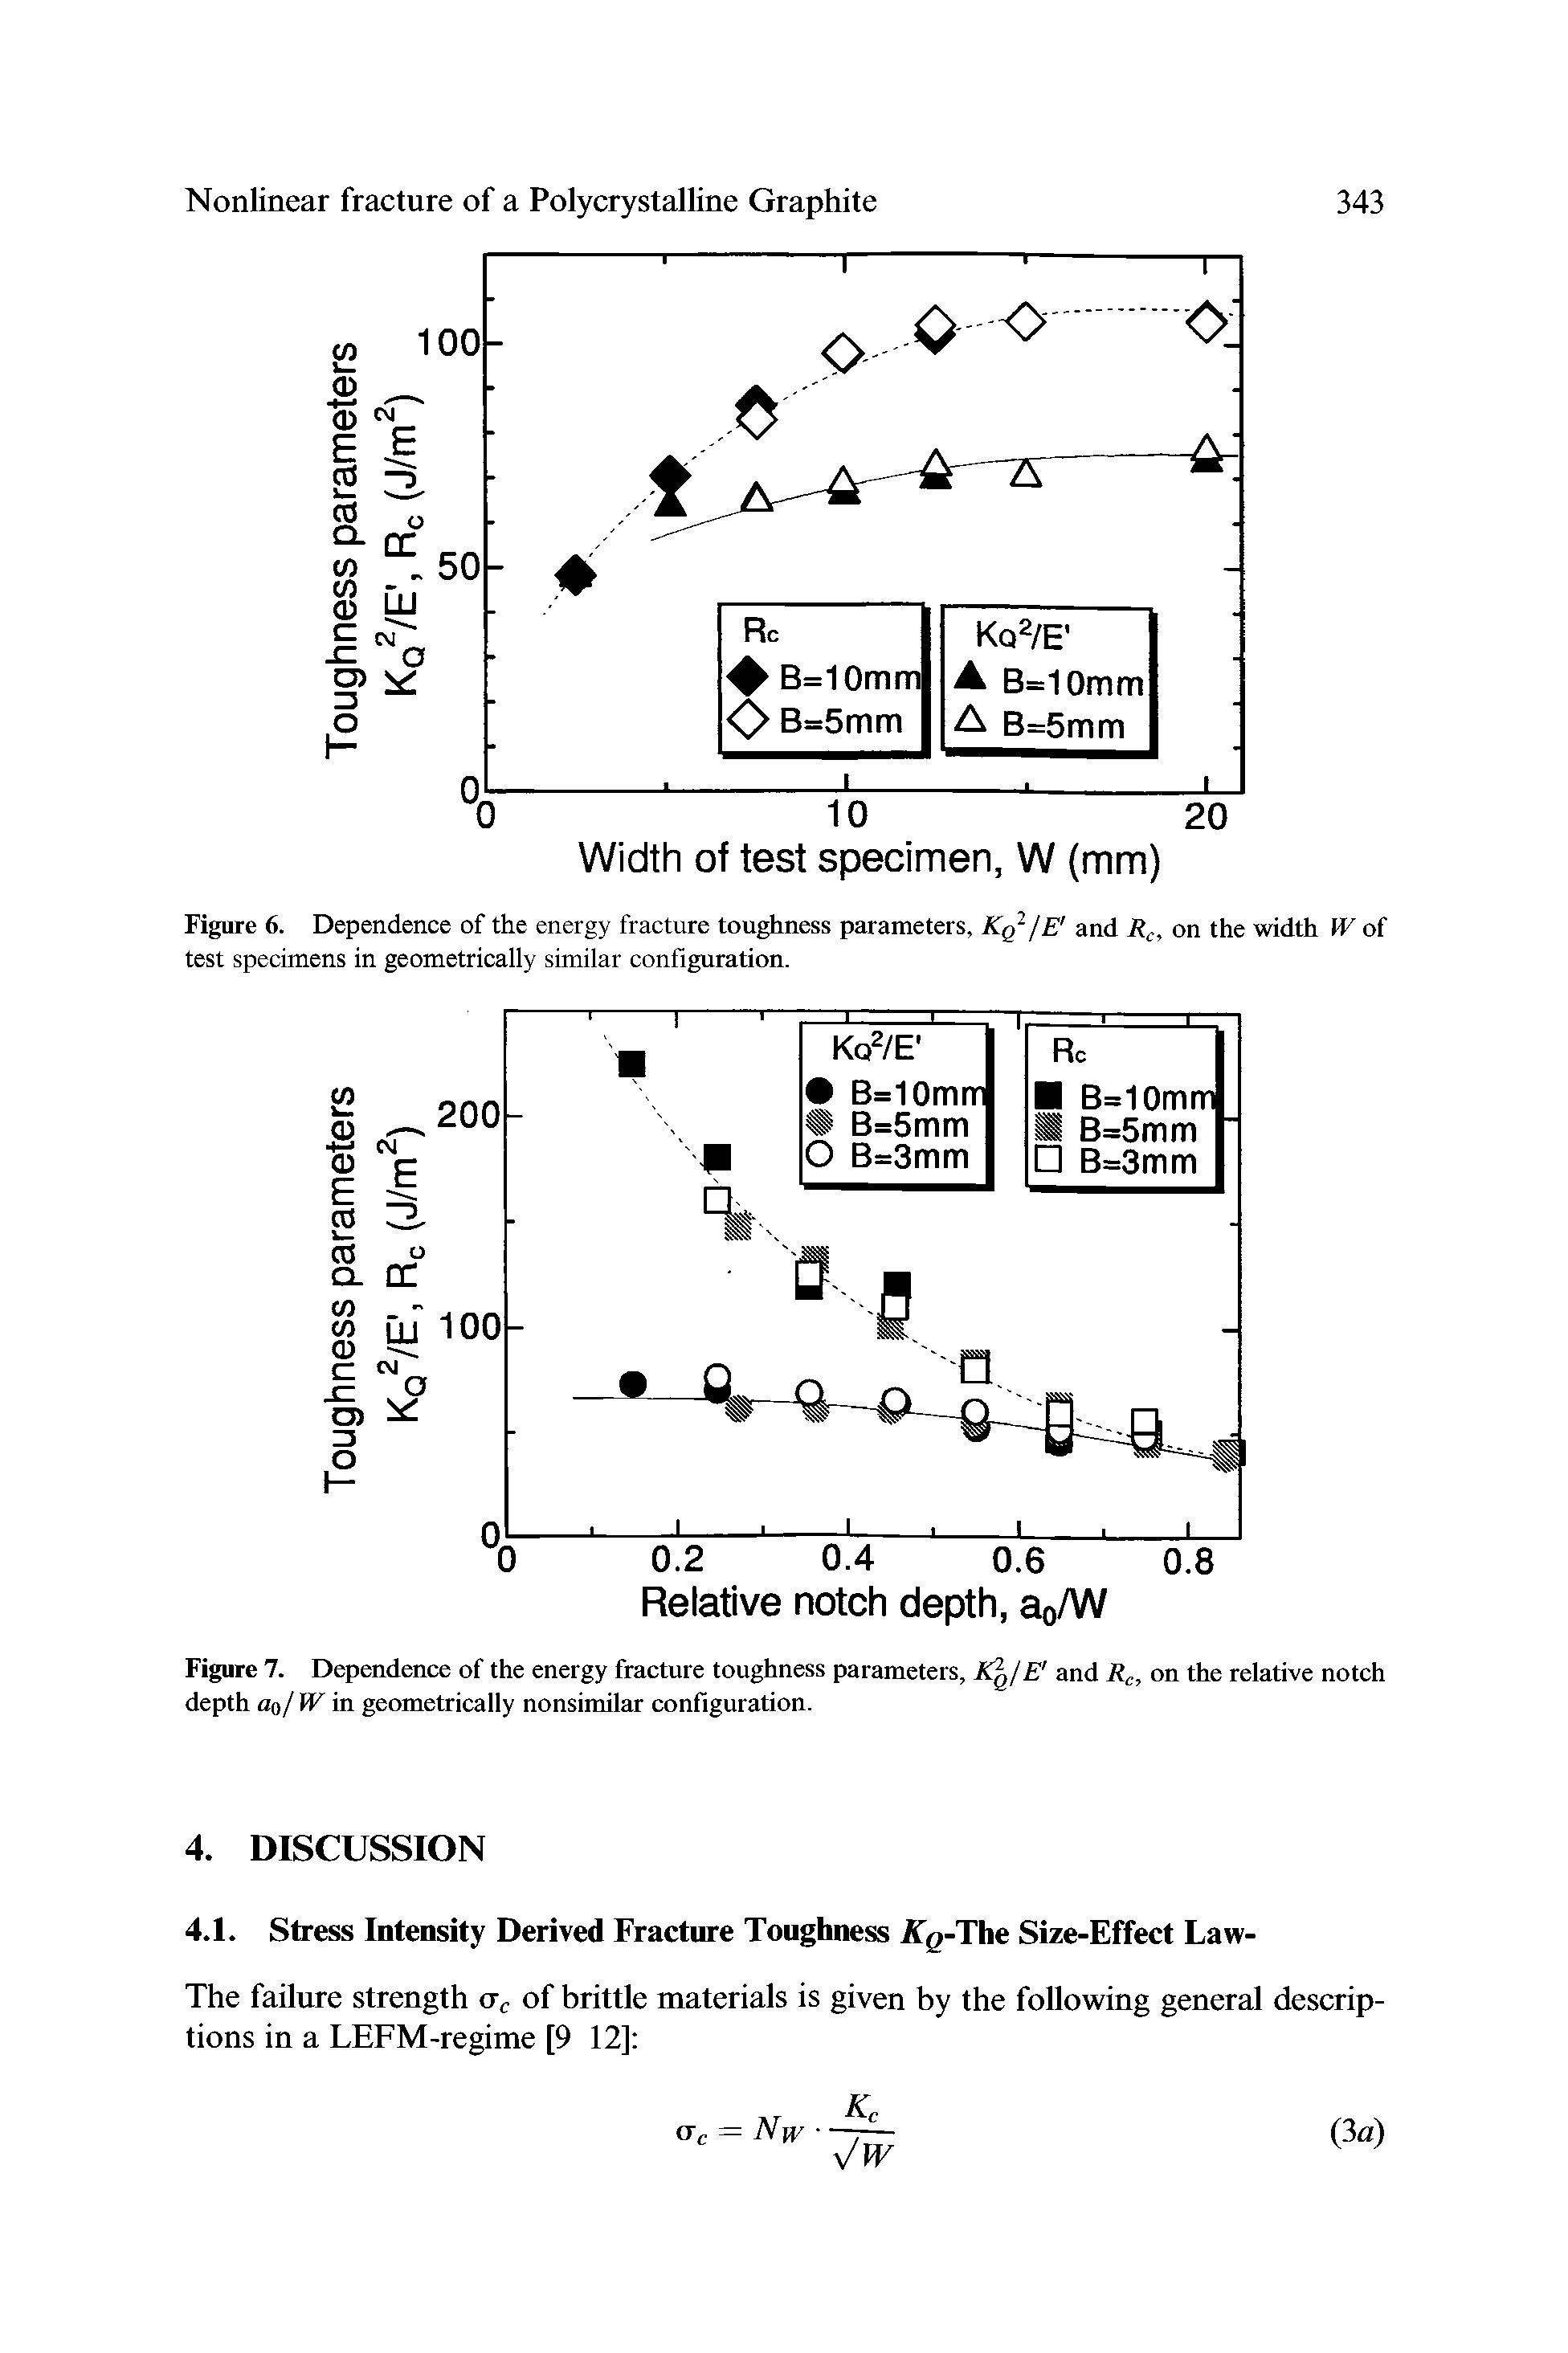 Figure 6. Dependence of the energy fracture toughness parameters, jE and it,., on the width IV of test specimens in geometrically similar configuration.